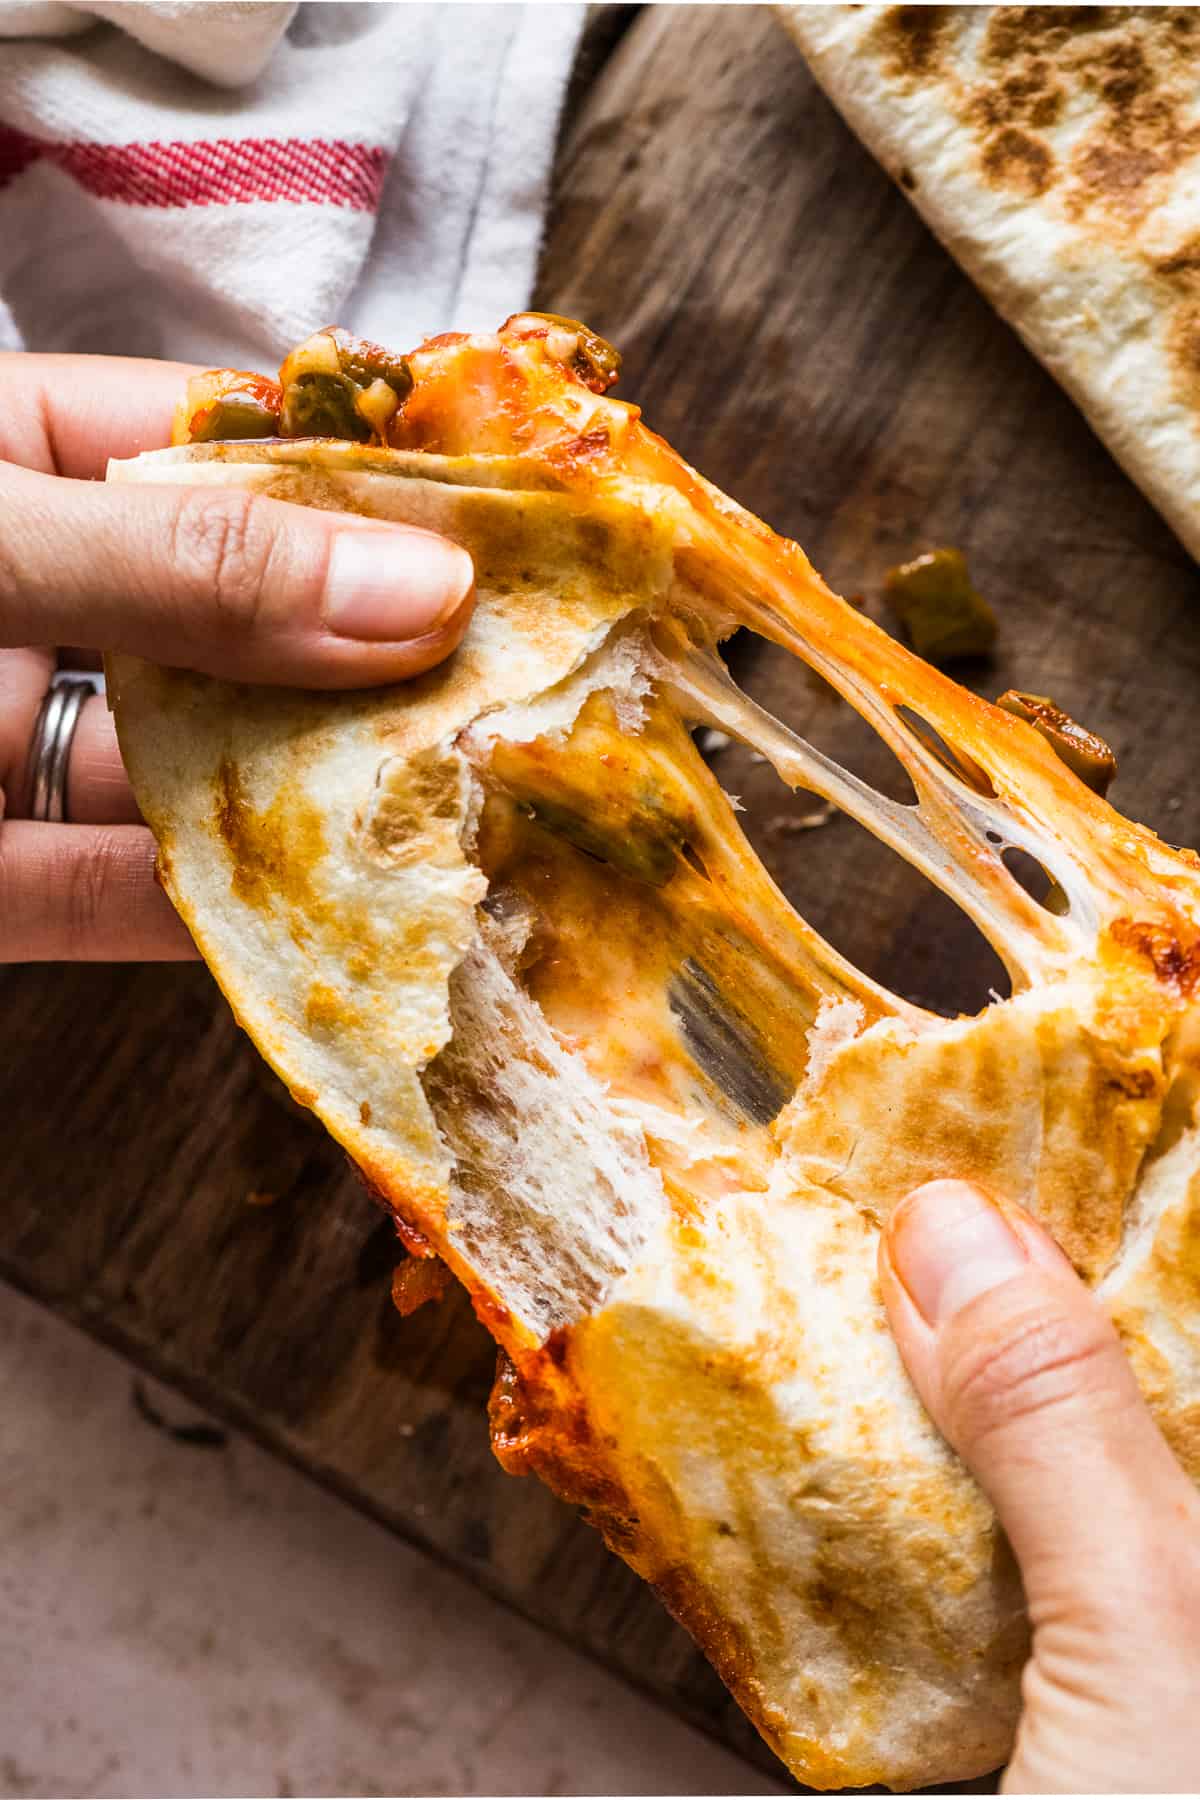 A quesadilla being pulled apart to show the stretchy cheese inside.